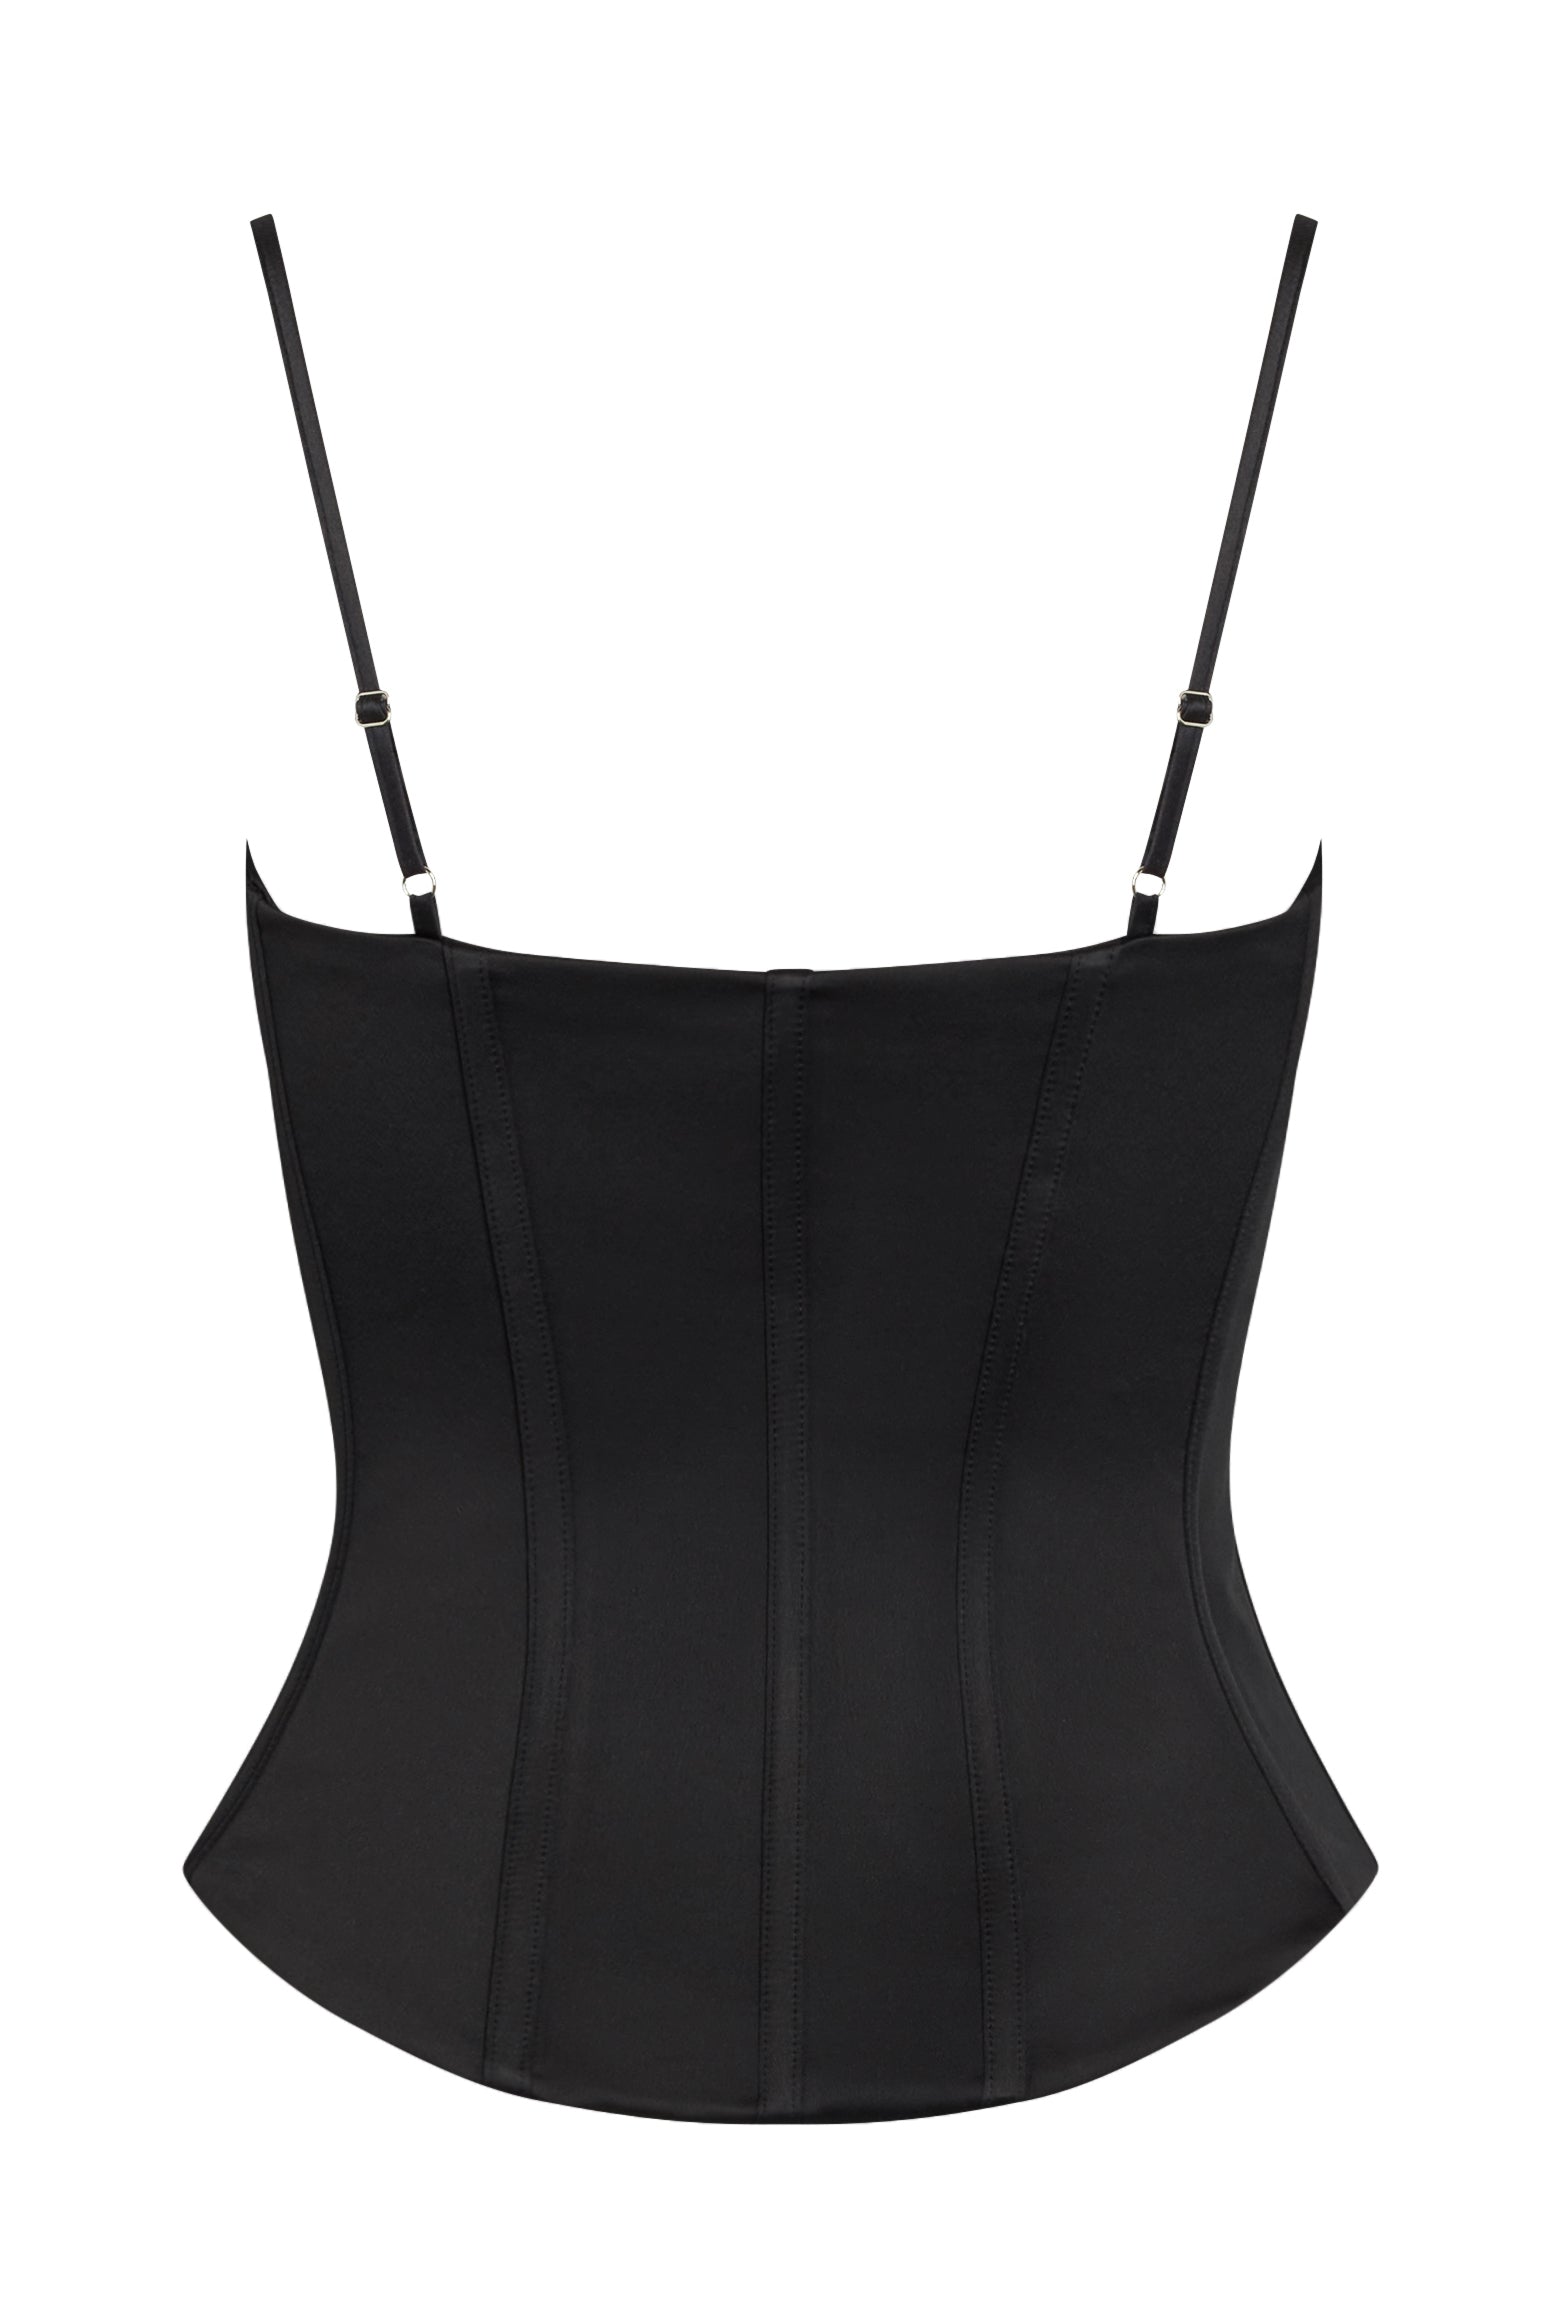 Wolford Women's Etoile - Lightly Lined Long Line Bustier Top, Black, 80D